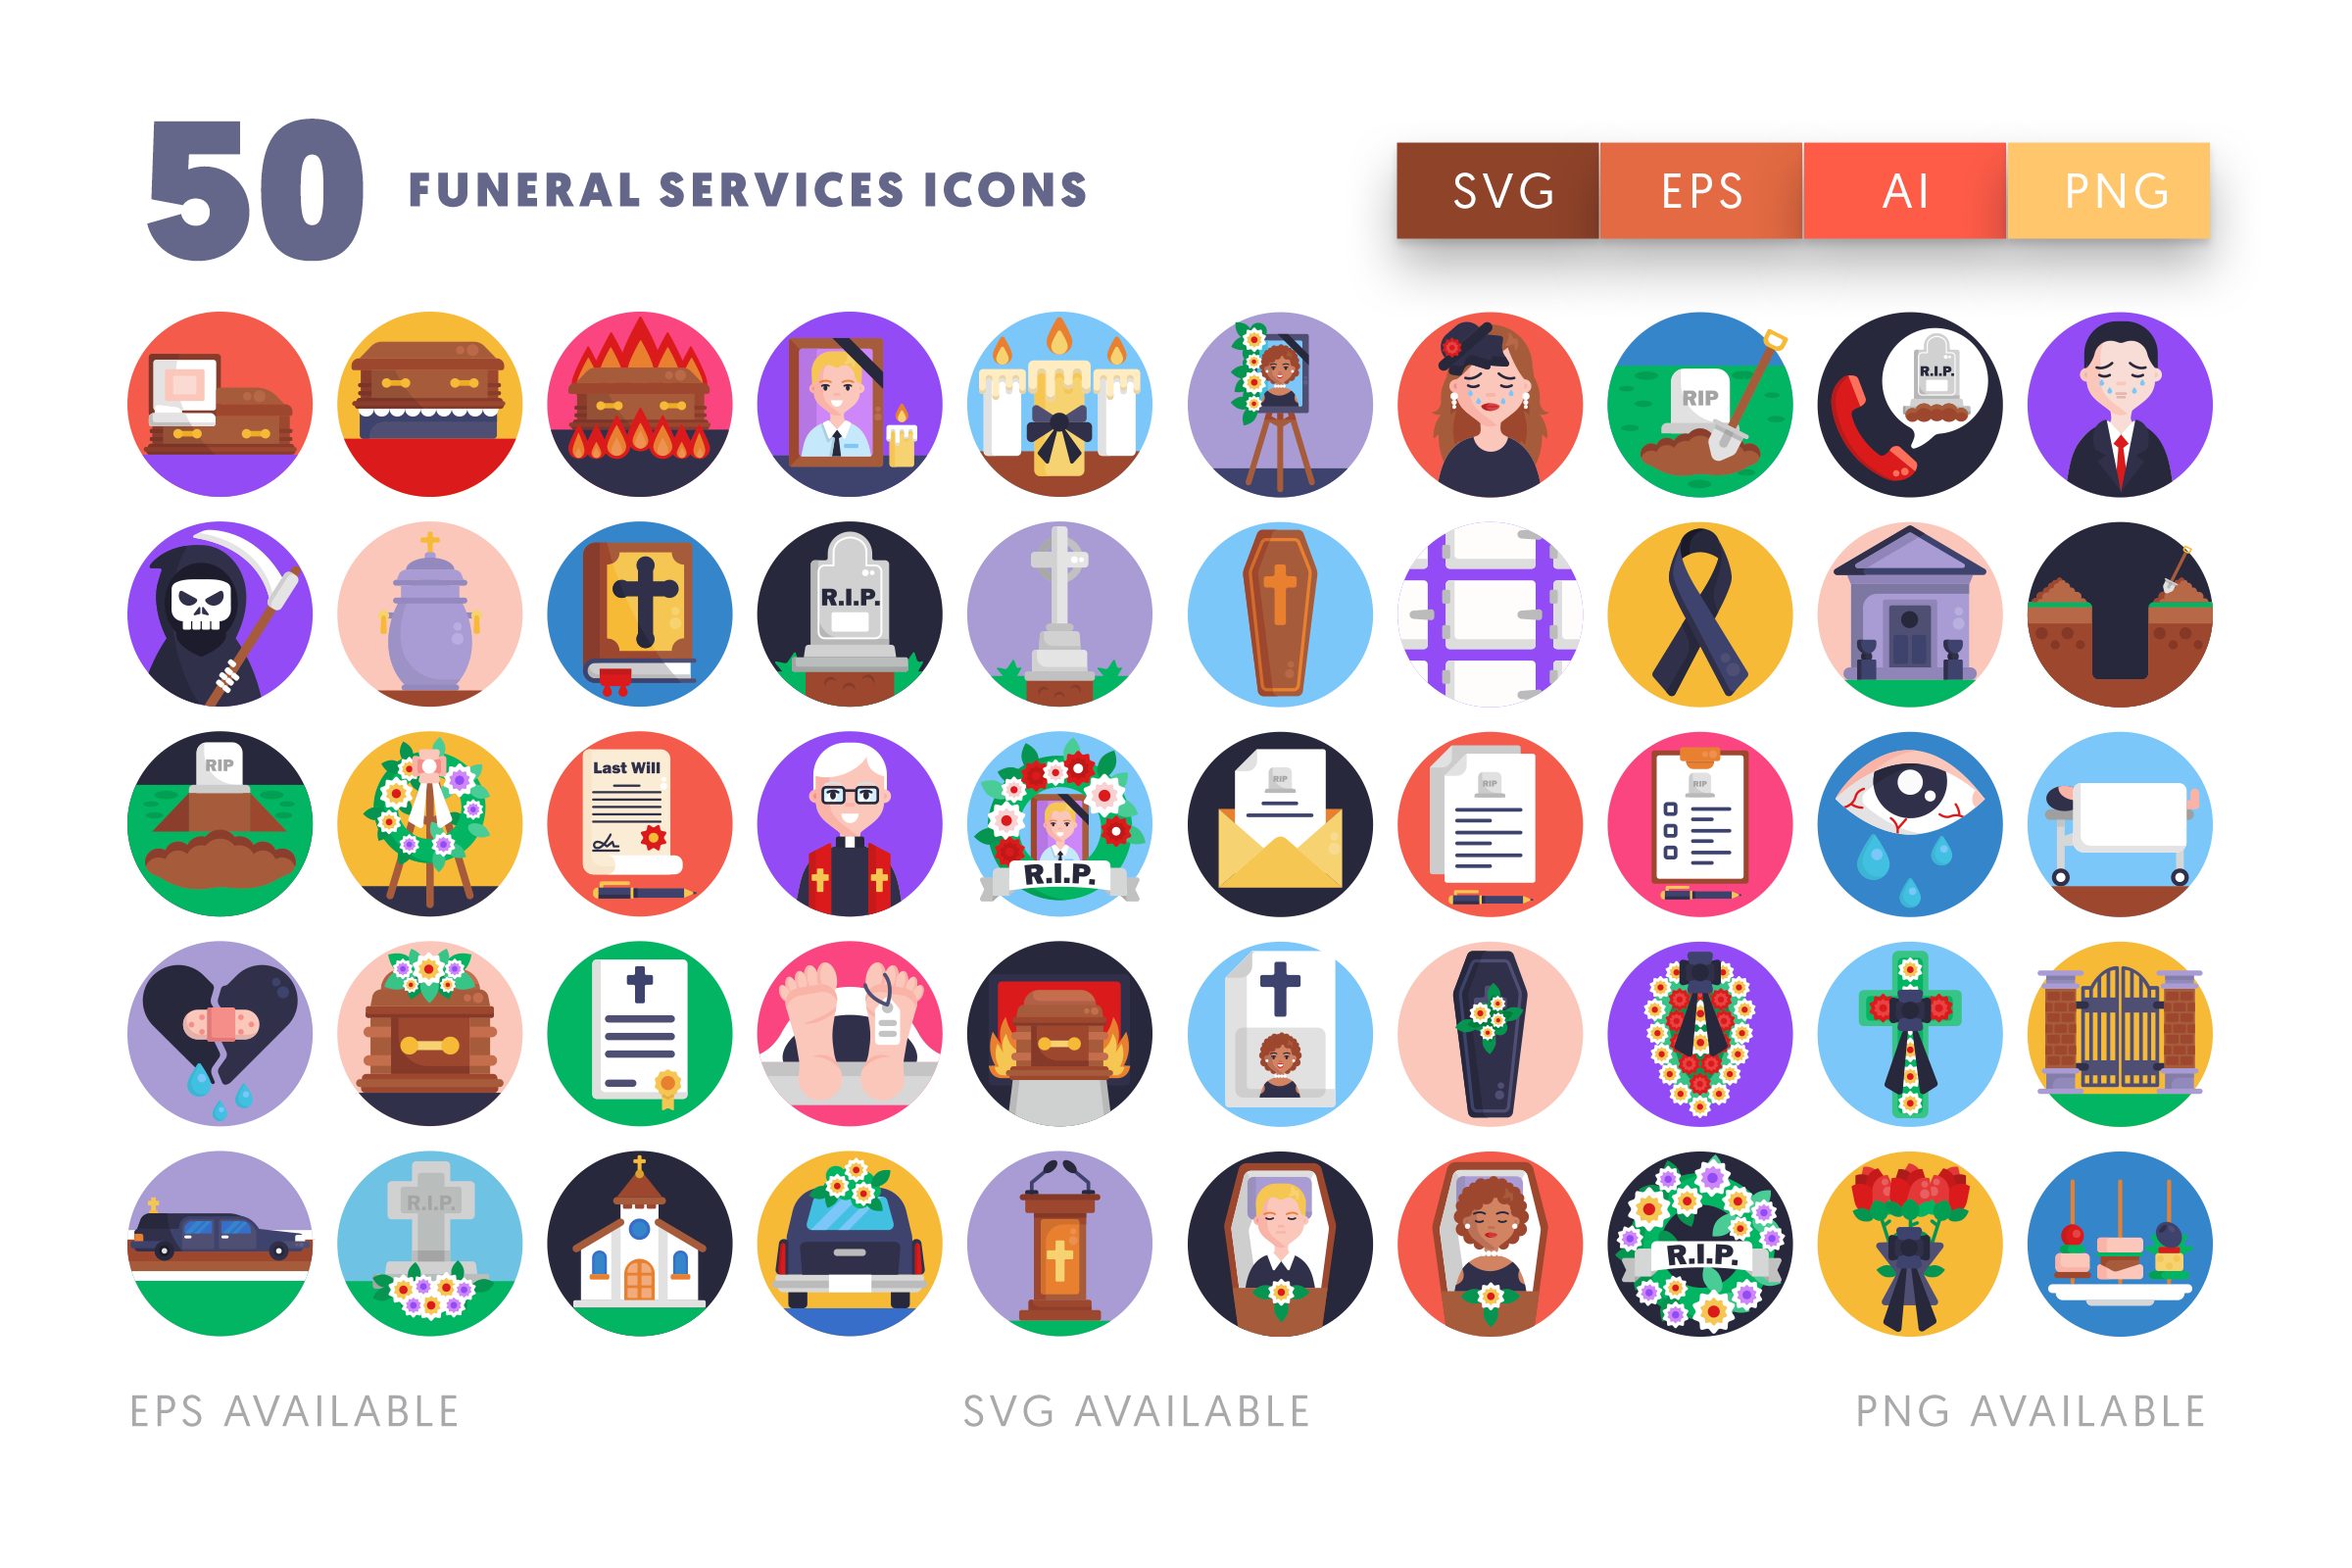 Funeral Services icons png/svg/eps